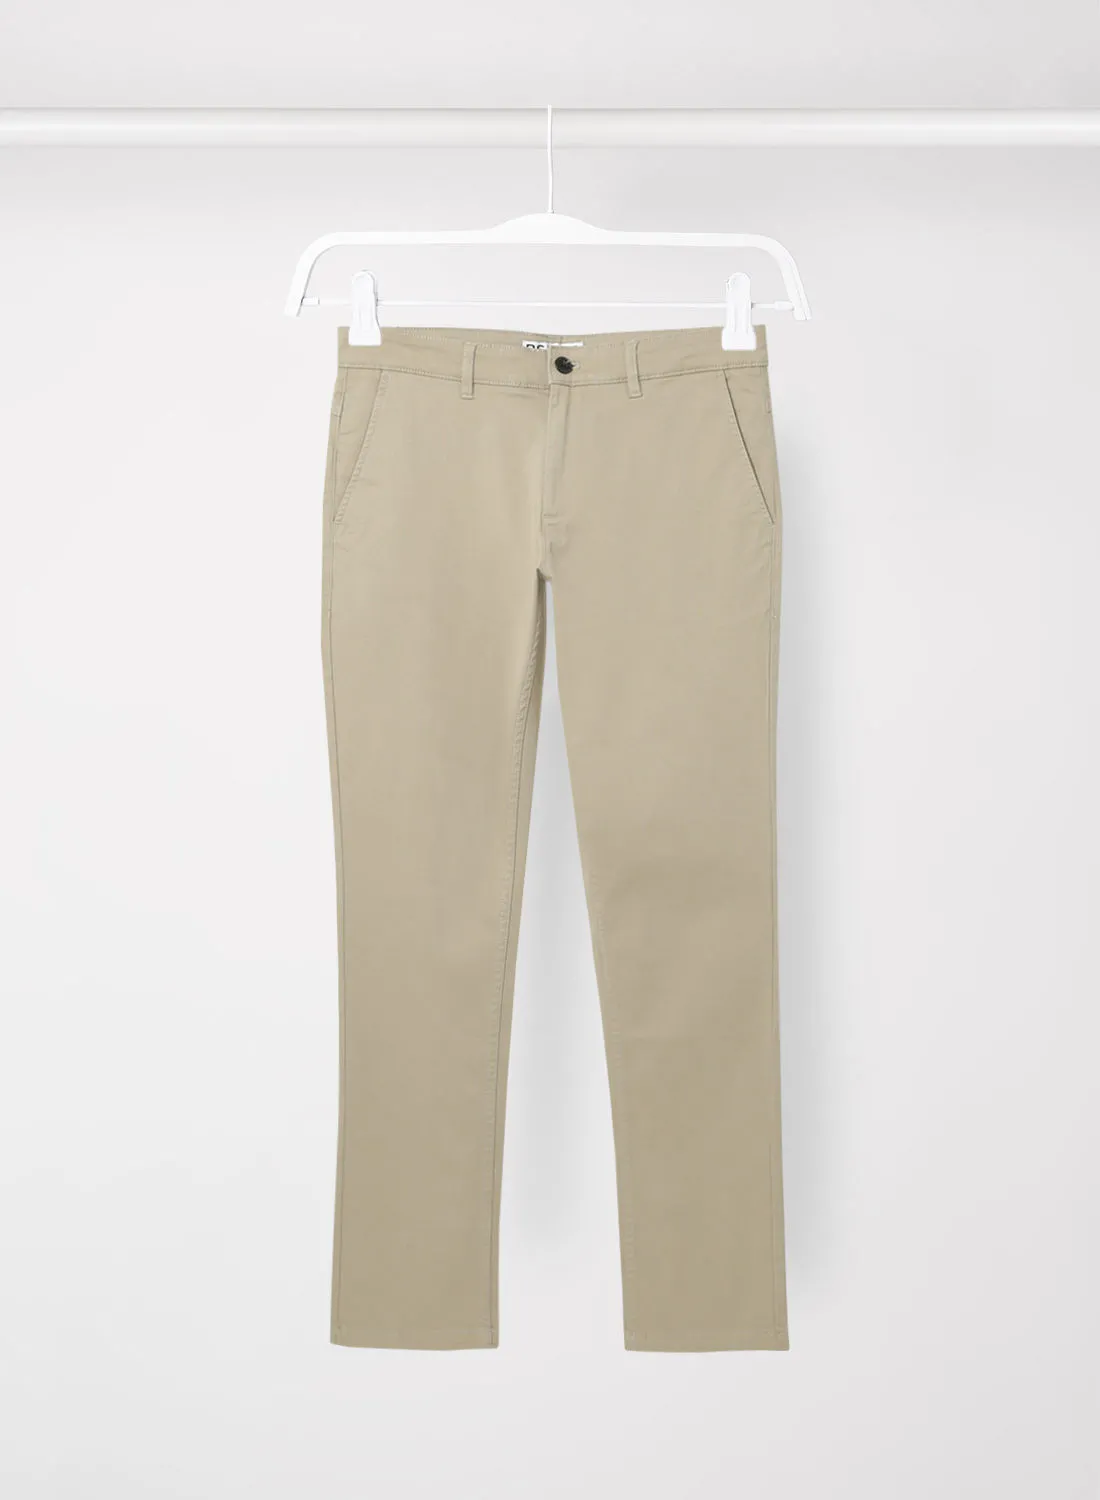 R&B Full Length Plain Chinos With Pocket Detail And Belt Loops Light Beige